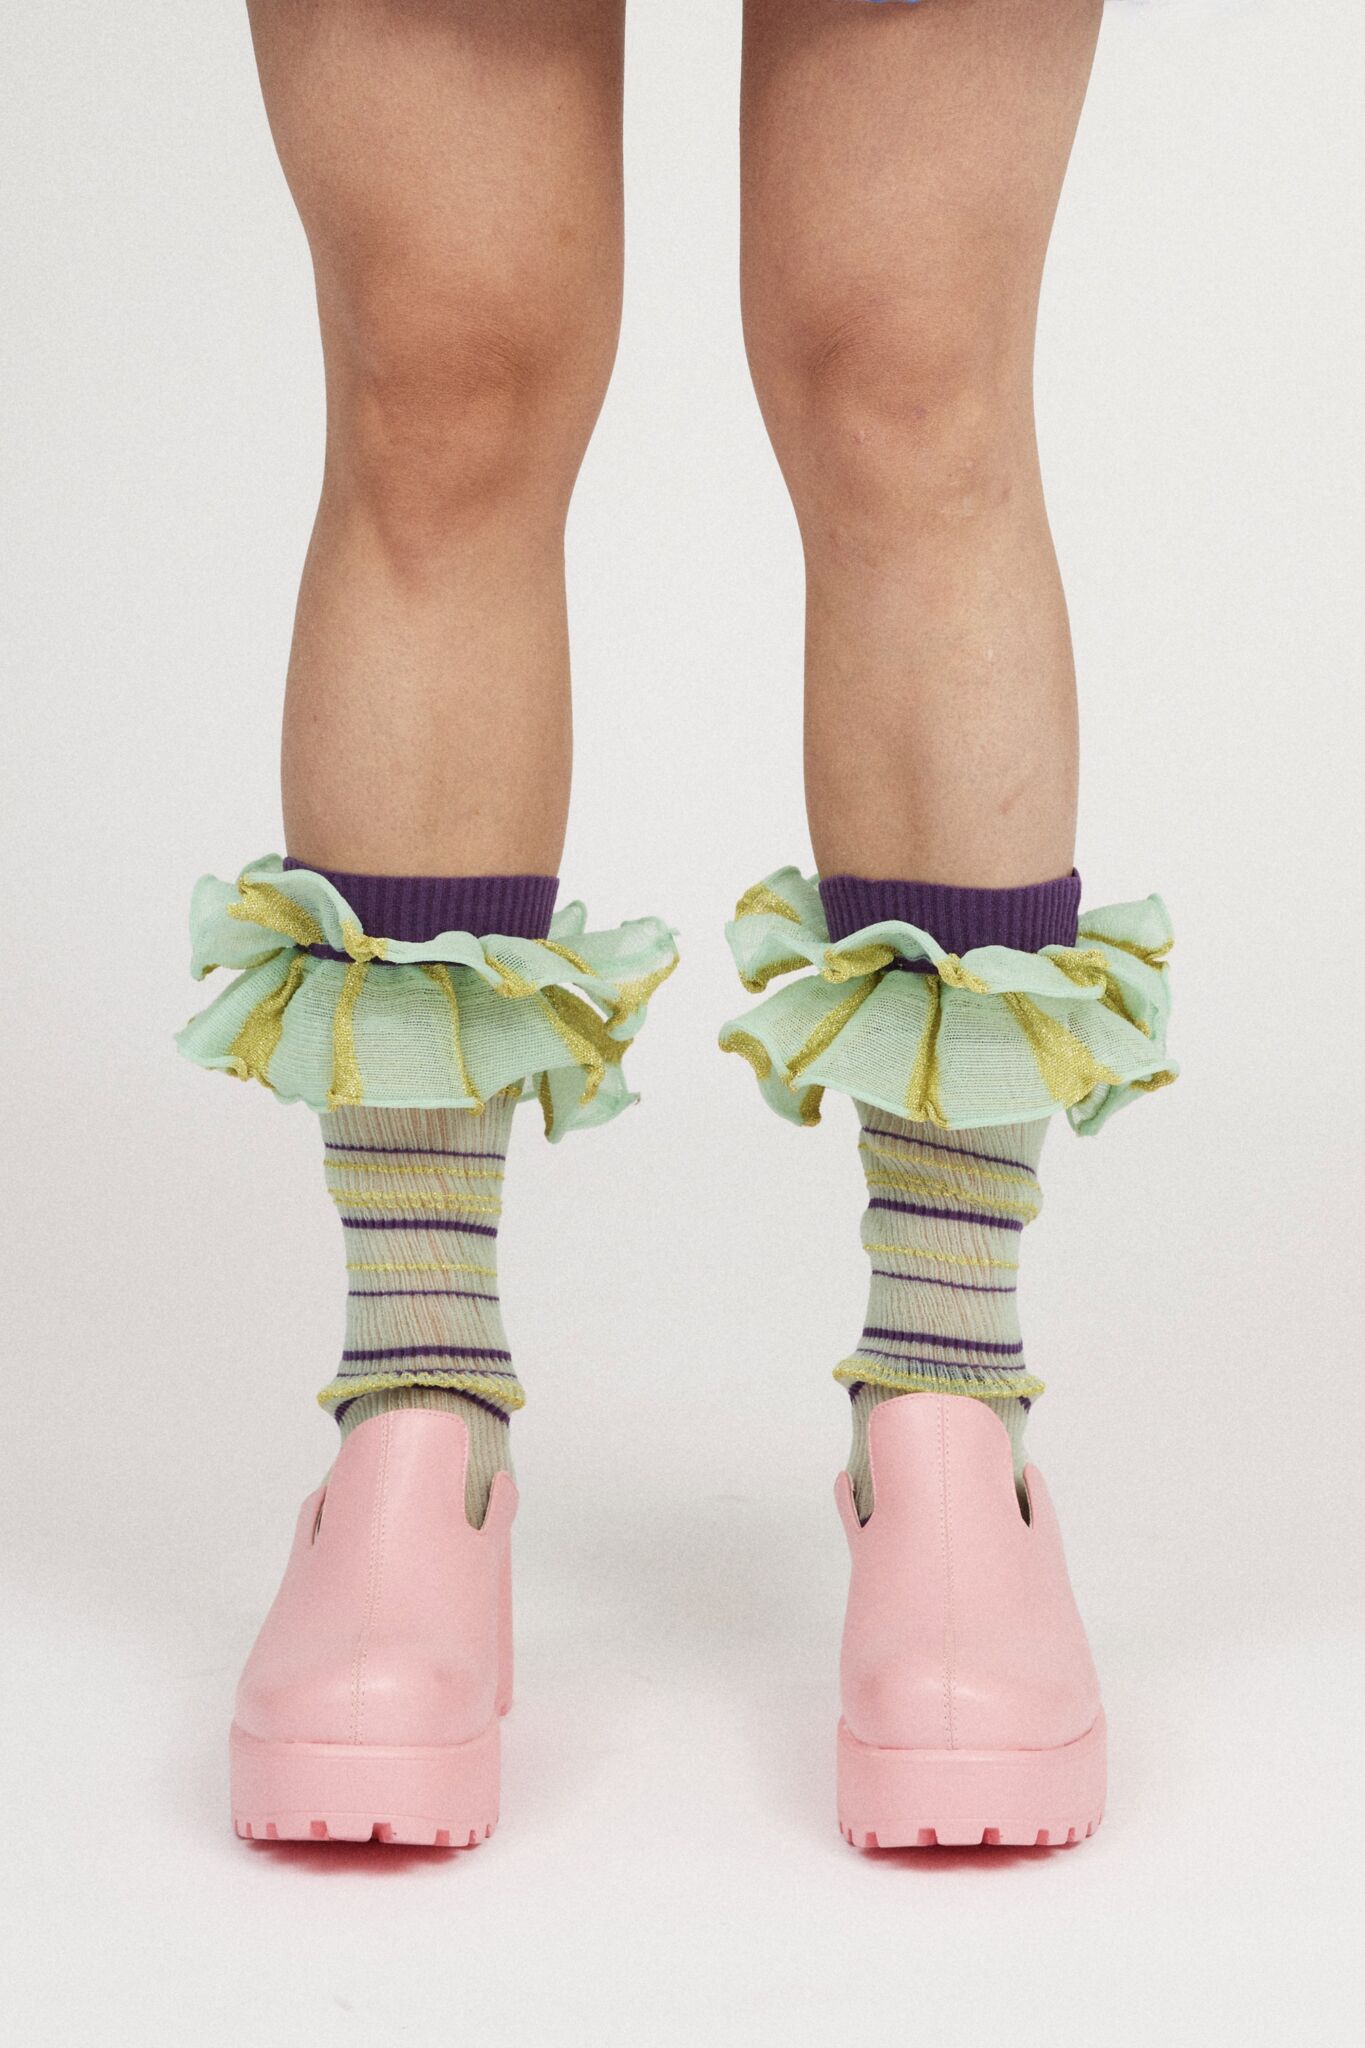 Mini Confetti Frills in mint green and purple are a knitted pair of transparent striped ruffle frills with a ribbed texture. The textile is lightweight, delicate and very flexible. Can be worn on both the arms and legs.